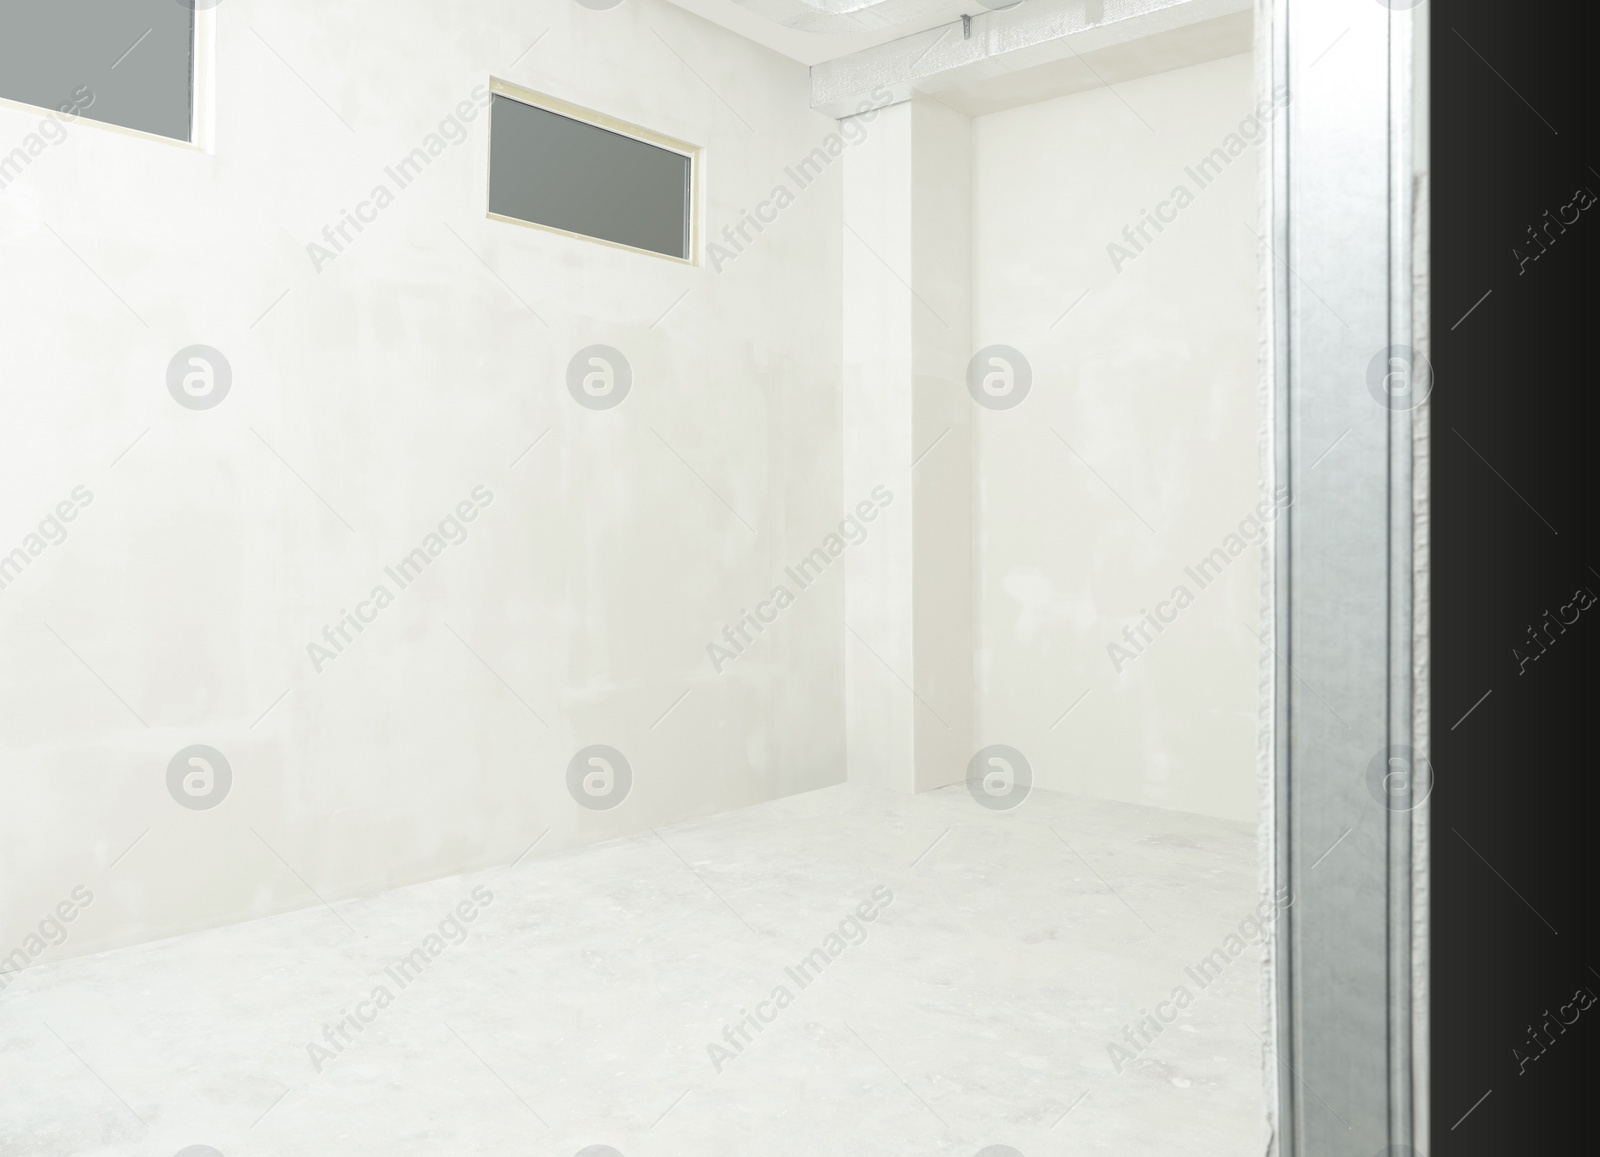 Photo of Empty room with white walls and windows